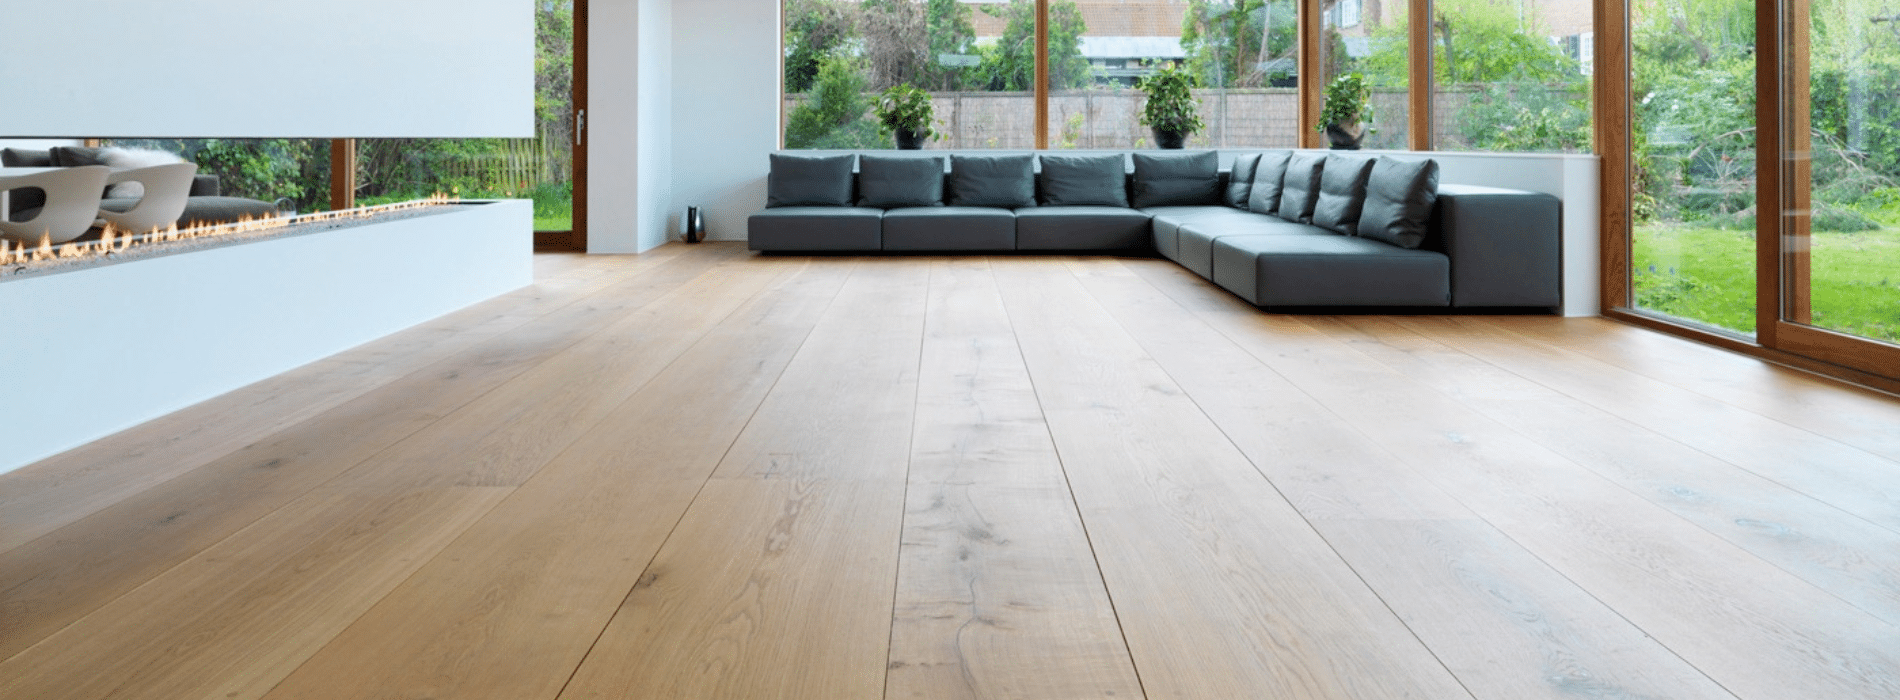 Revitalized engineered oak floors in Crofton Park, SE4 by Mr Sander®. Mid-oak stain and Junckers strong satin finish highlight rich wood grains. Displaying timeless elegance and durability, these restored floors promise long-lasting beauty in every detail.